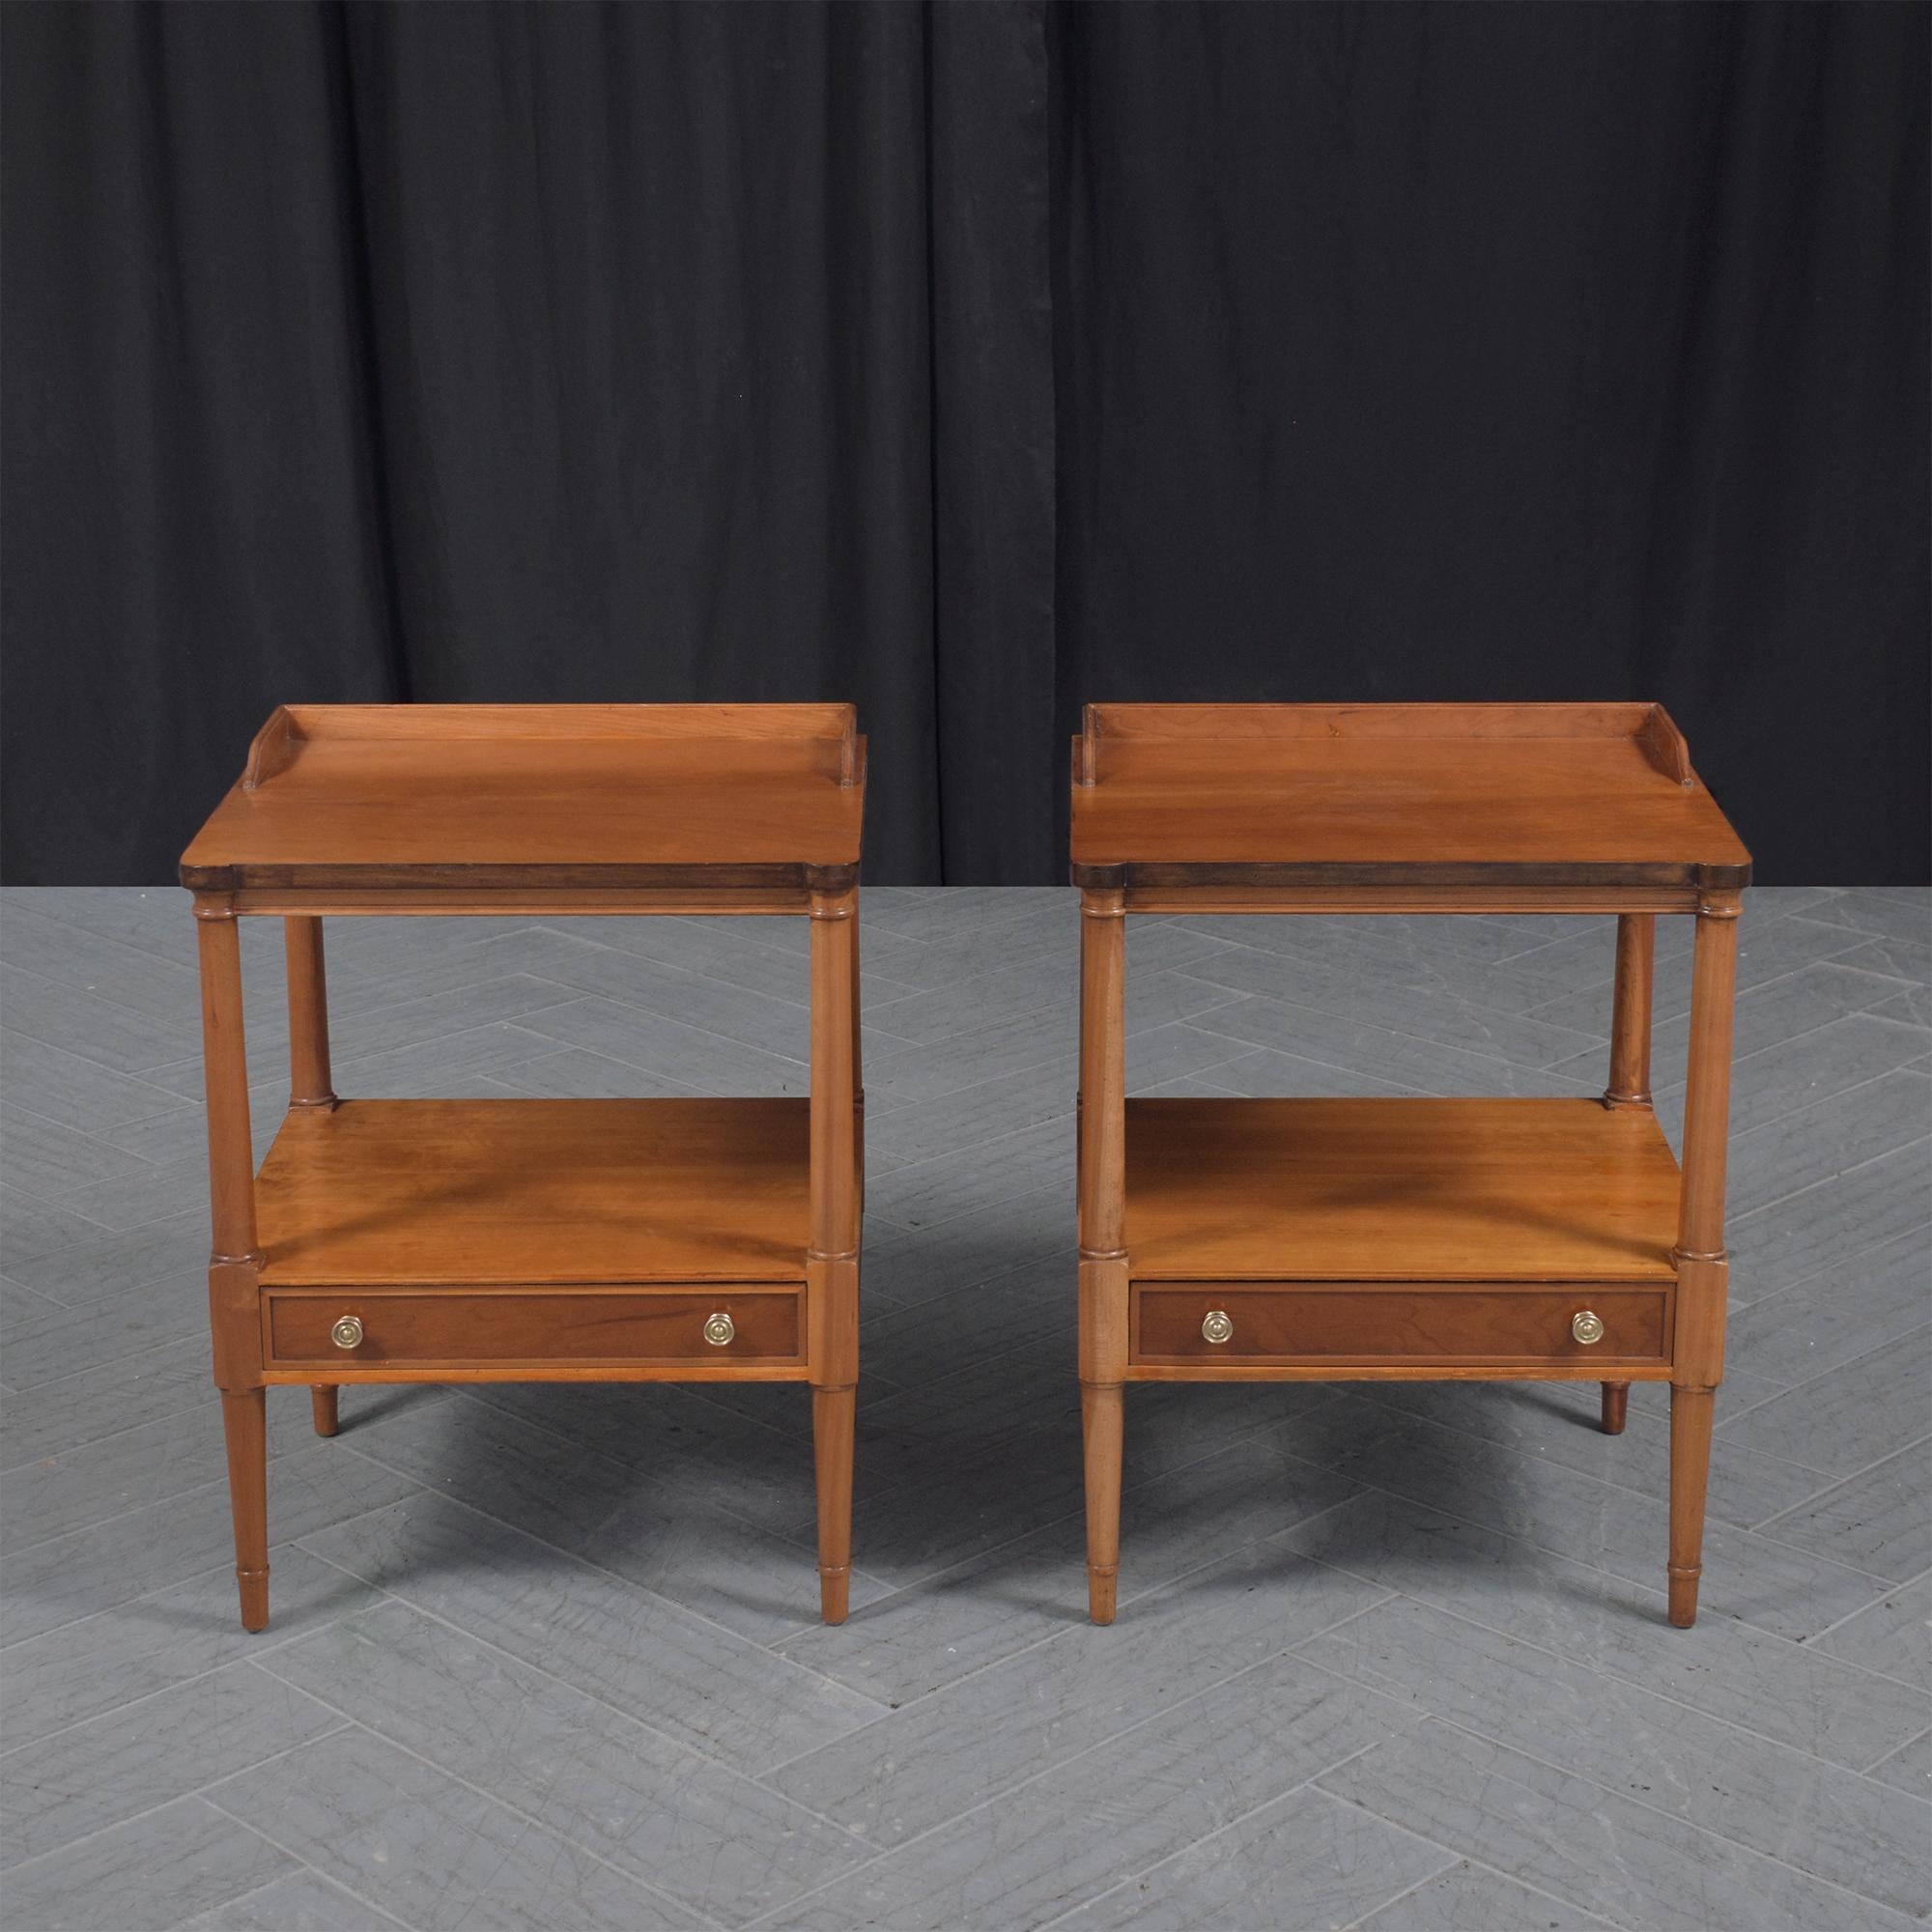 Mid-Century Modern Elegant Handcrafted Maple Bedside Tables with Brass Handles and Tapered Legs For Sale